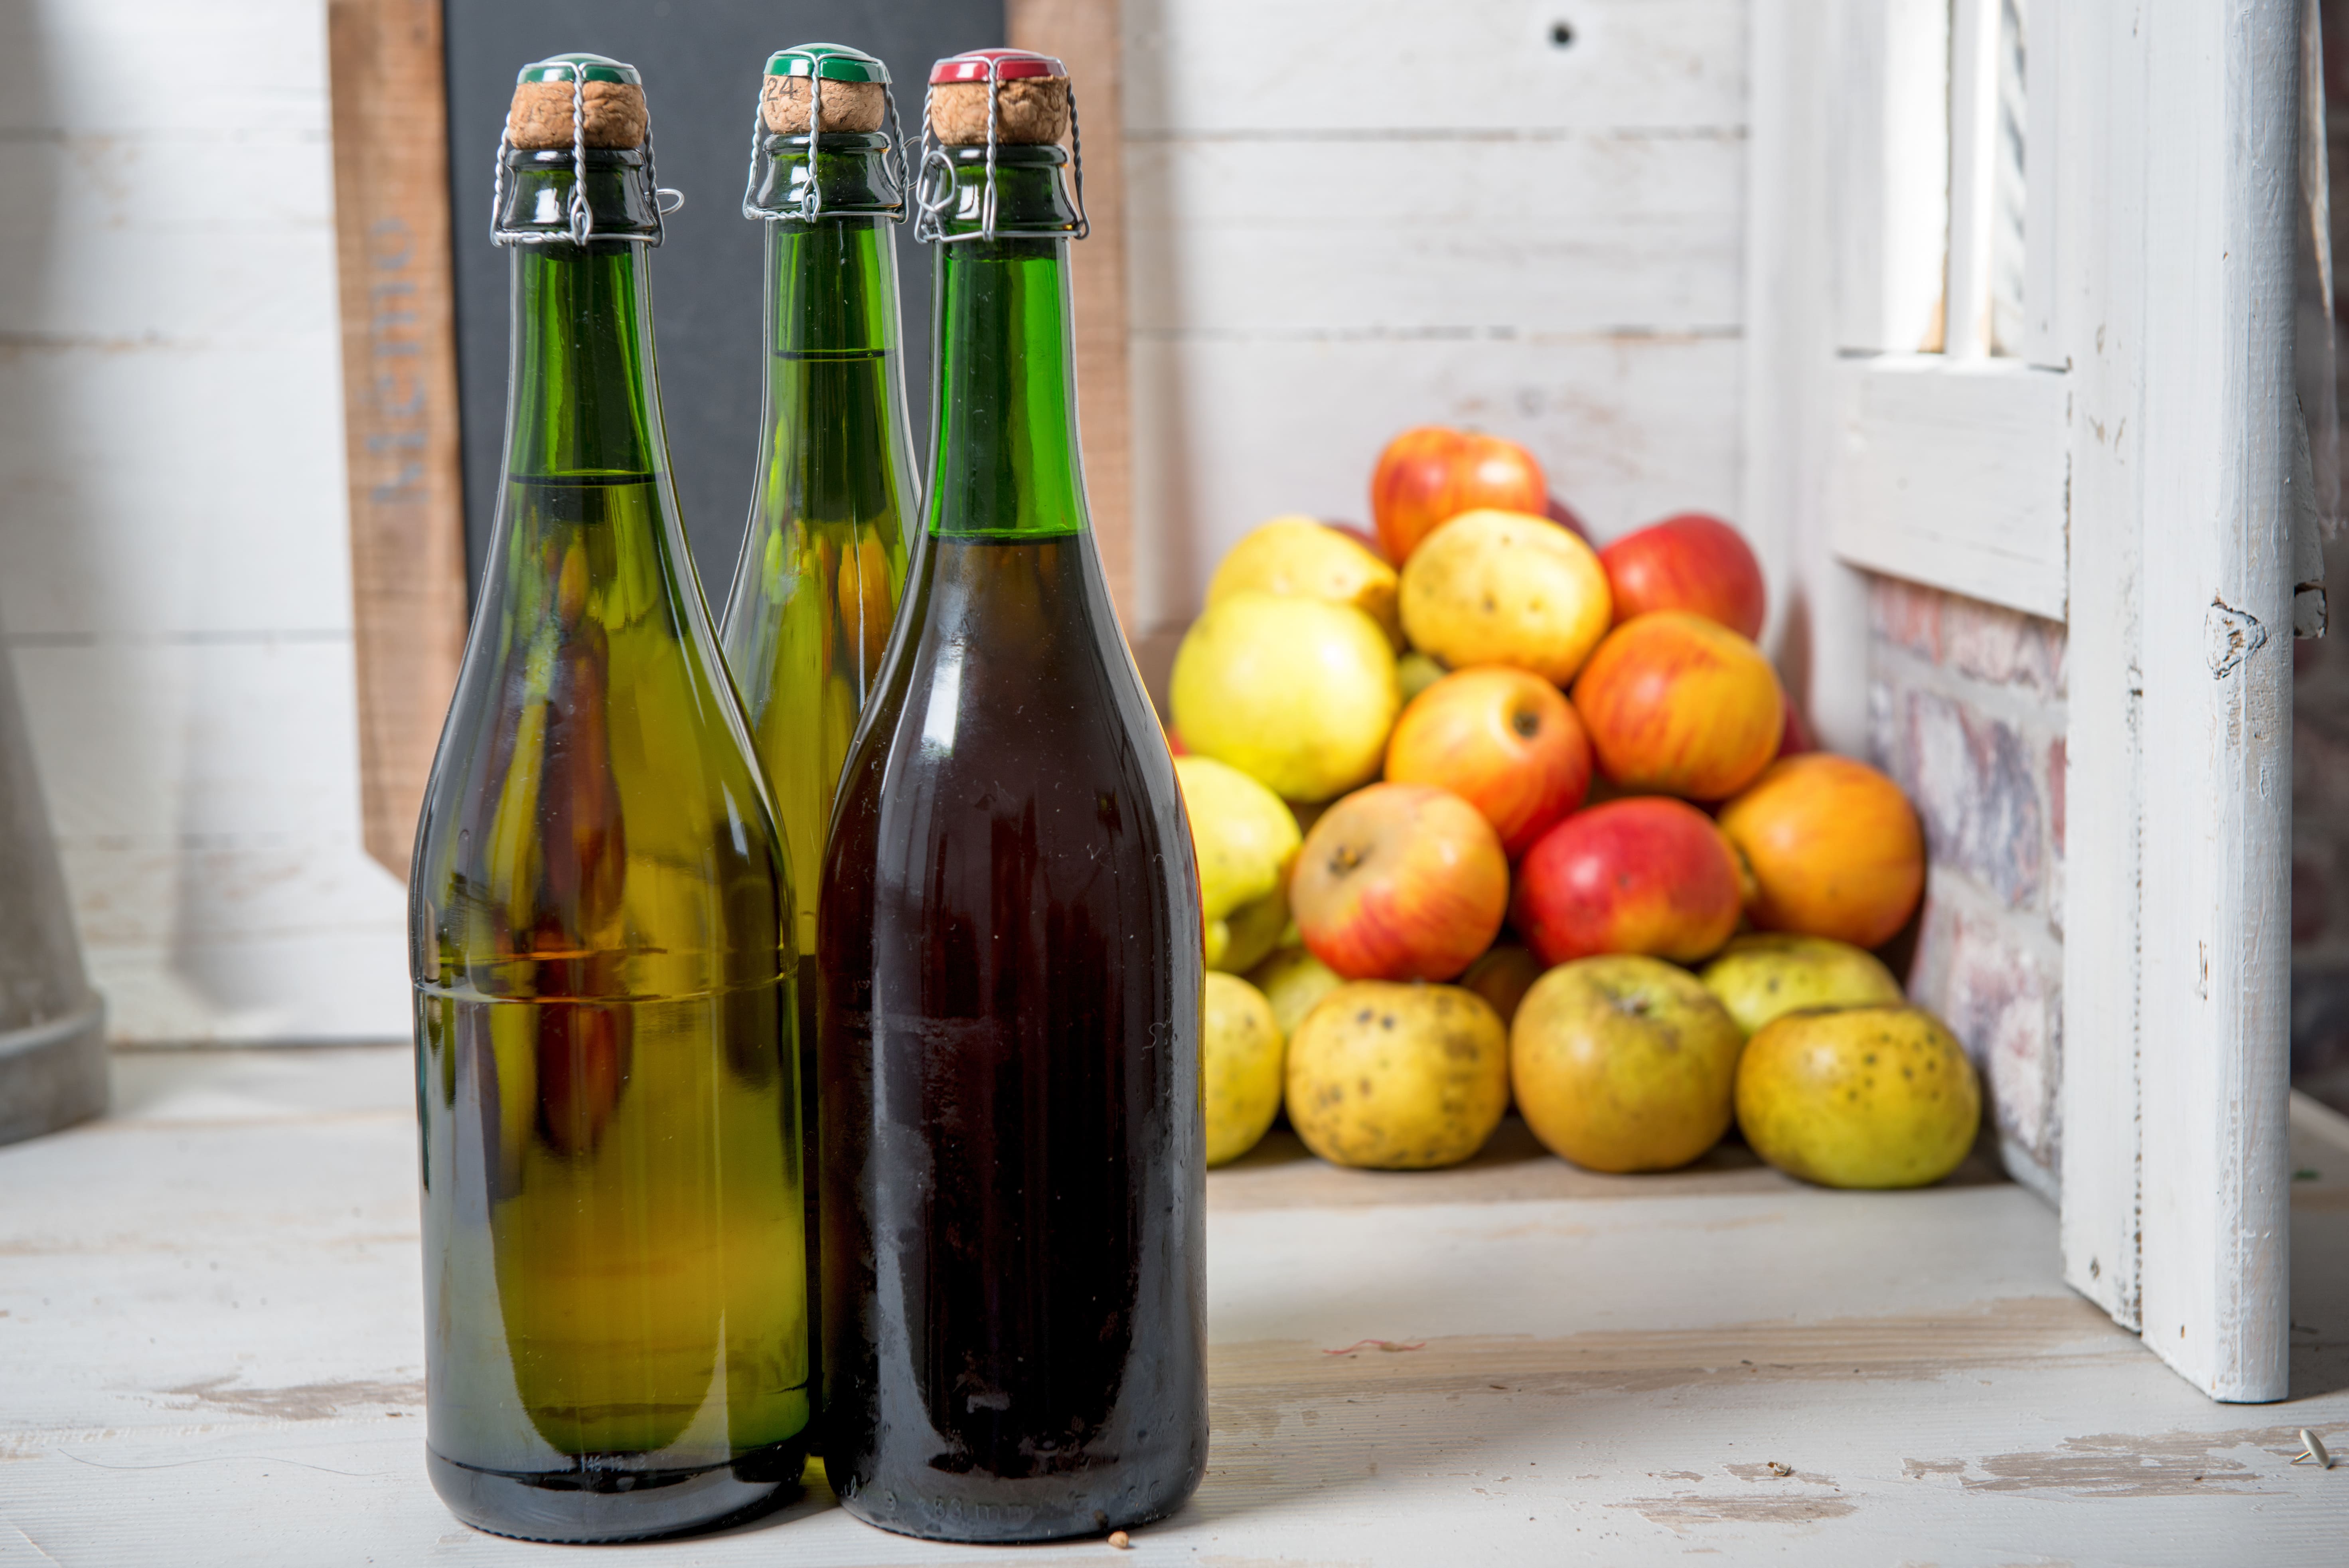 Three bottles of cider with apples stacked in the background